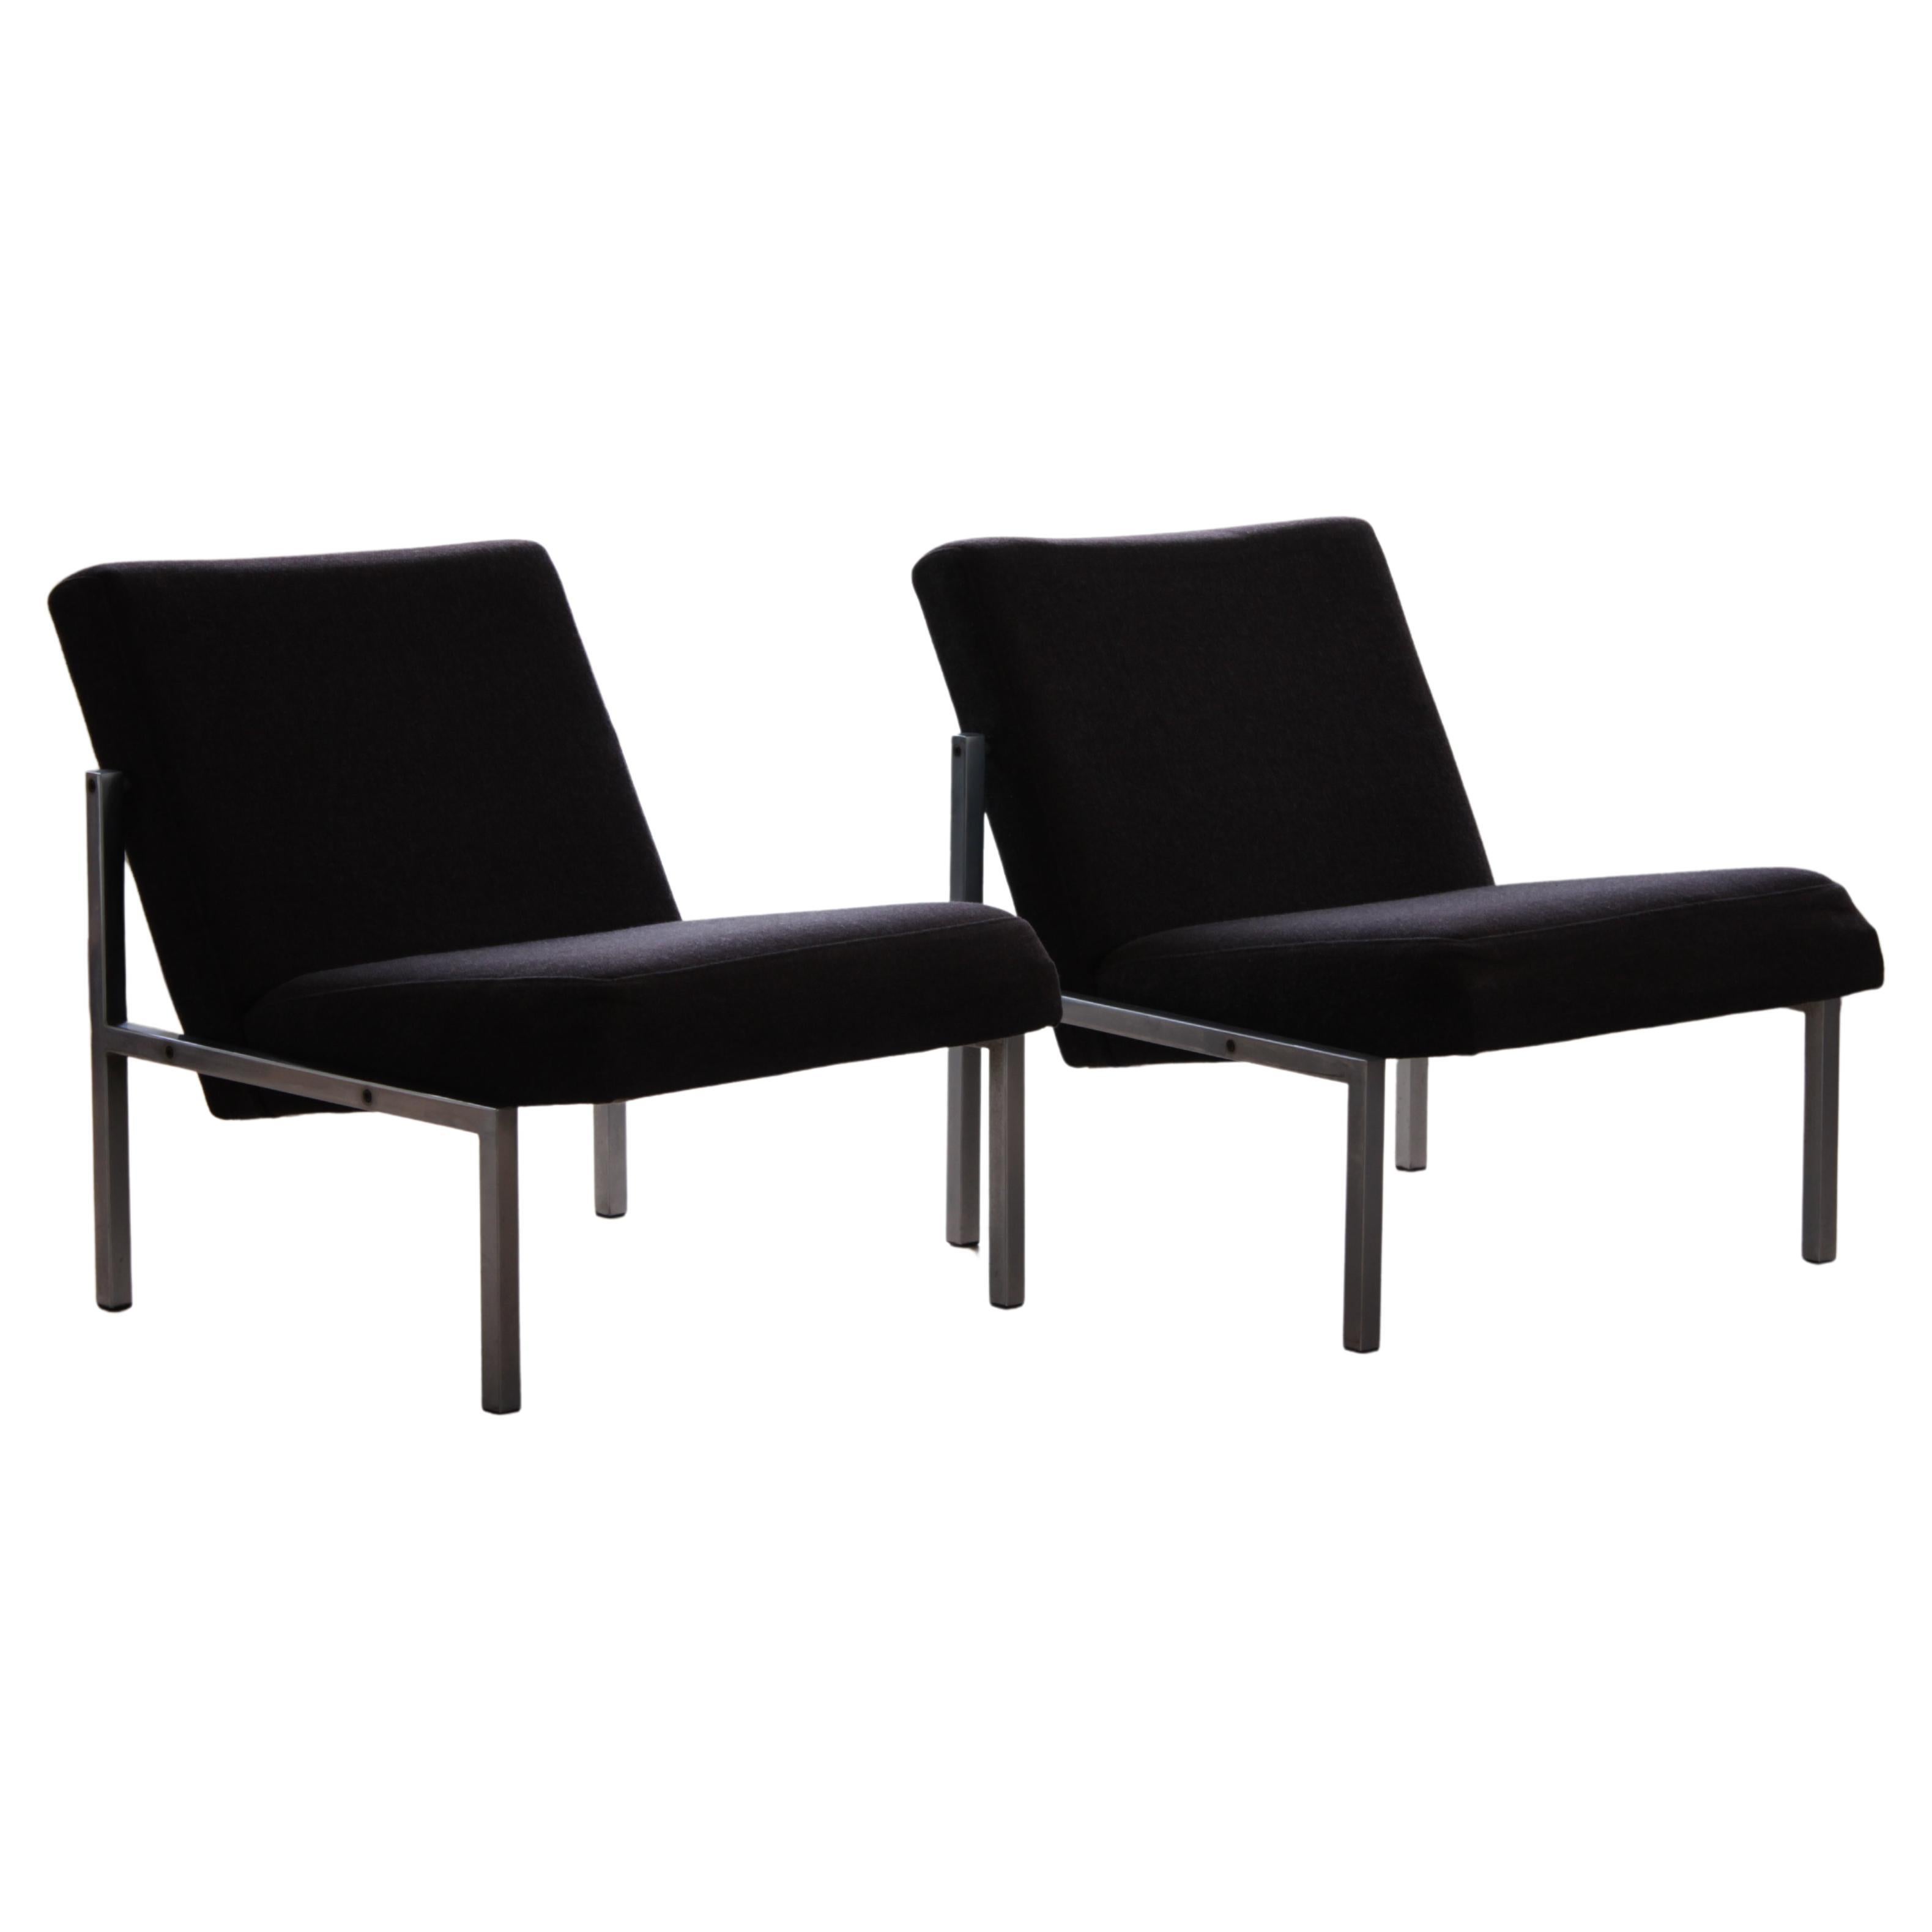 Pair of SZ11 Lounge Chairs by Martin Visser for 't Spectrum, 1960s For Sale